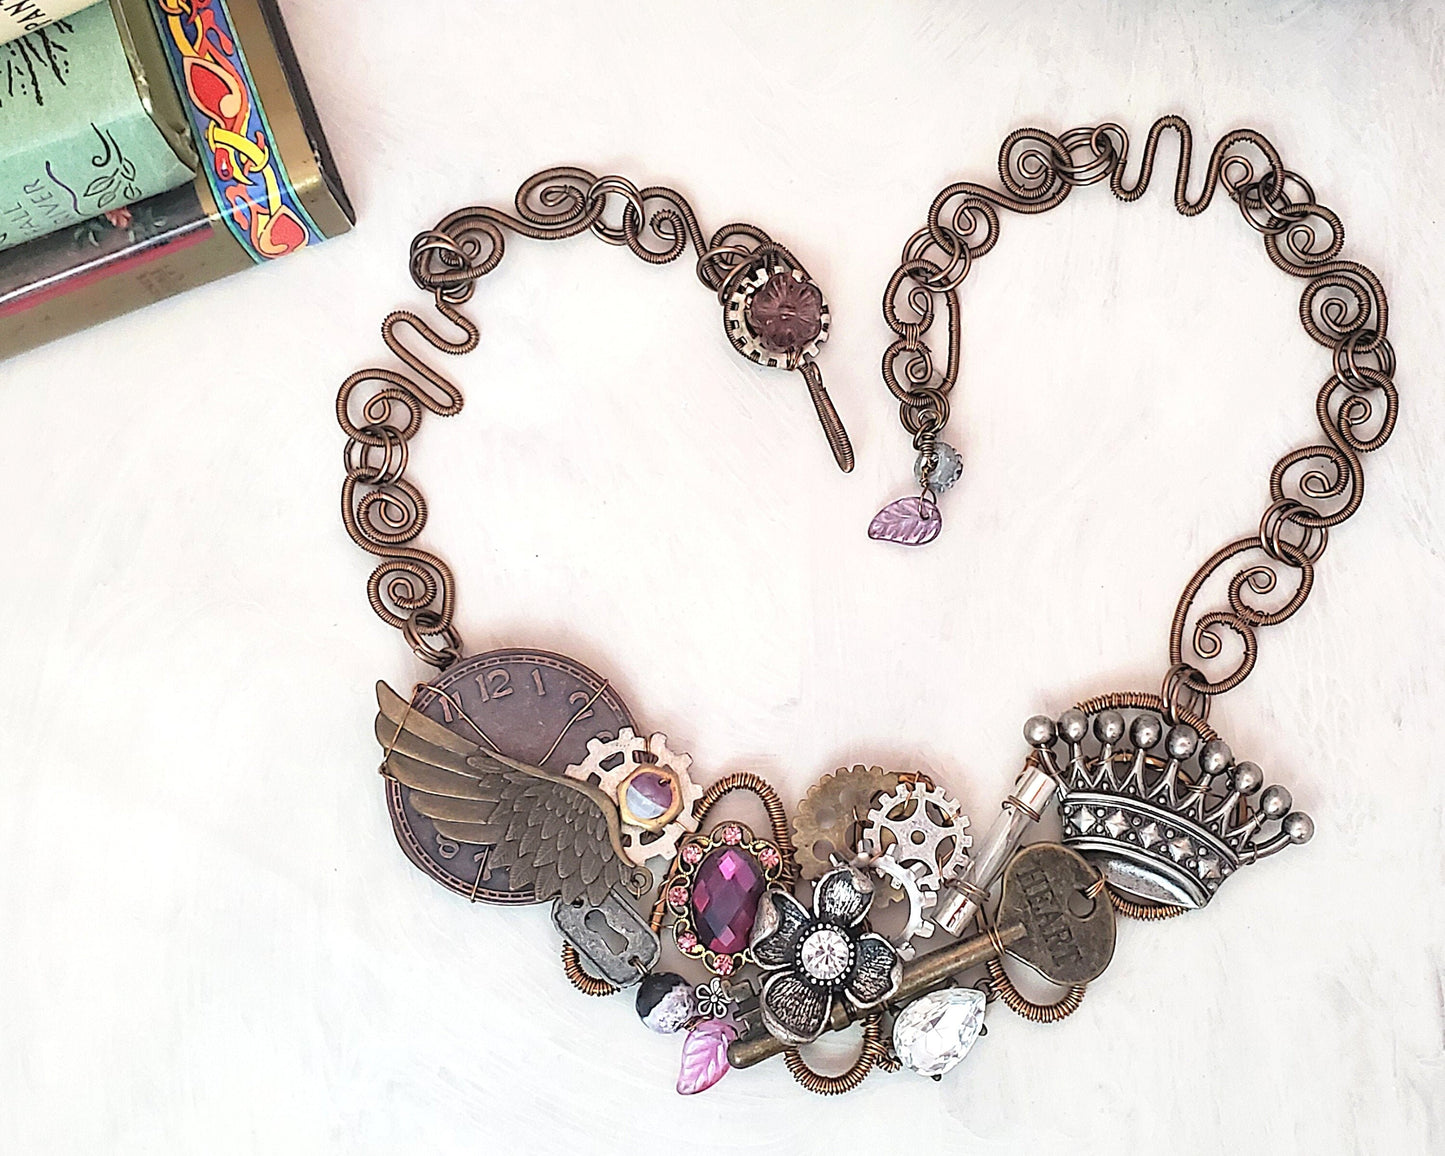 Steampunk Crown and Heart Key Bib Statement Necklace in Purple, Wing, Clock, Gears, Adjustable Length